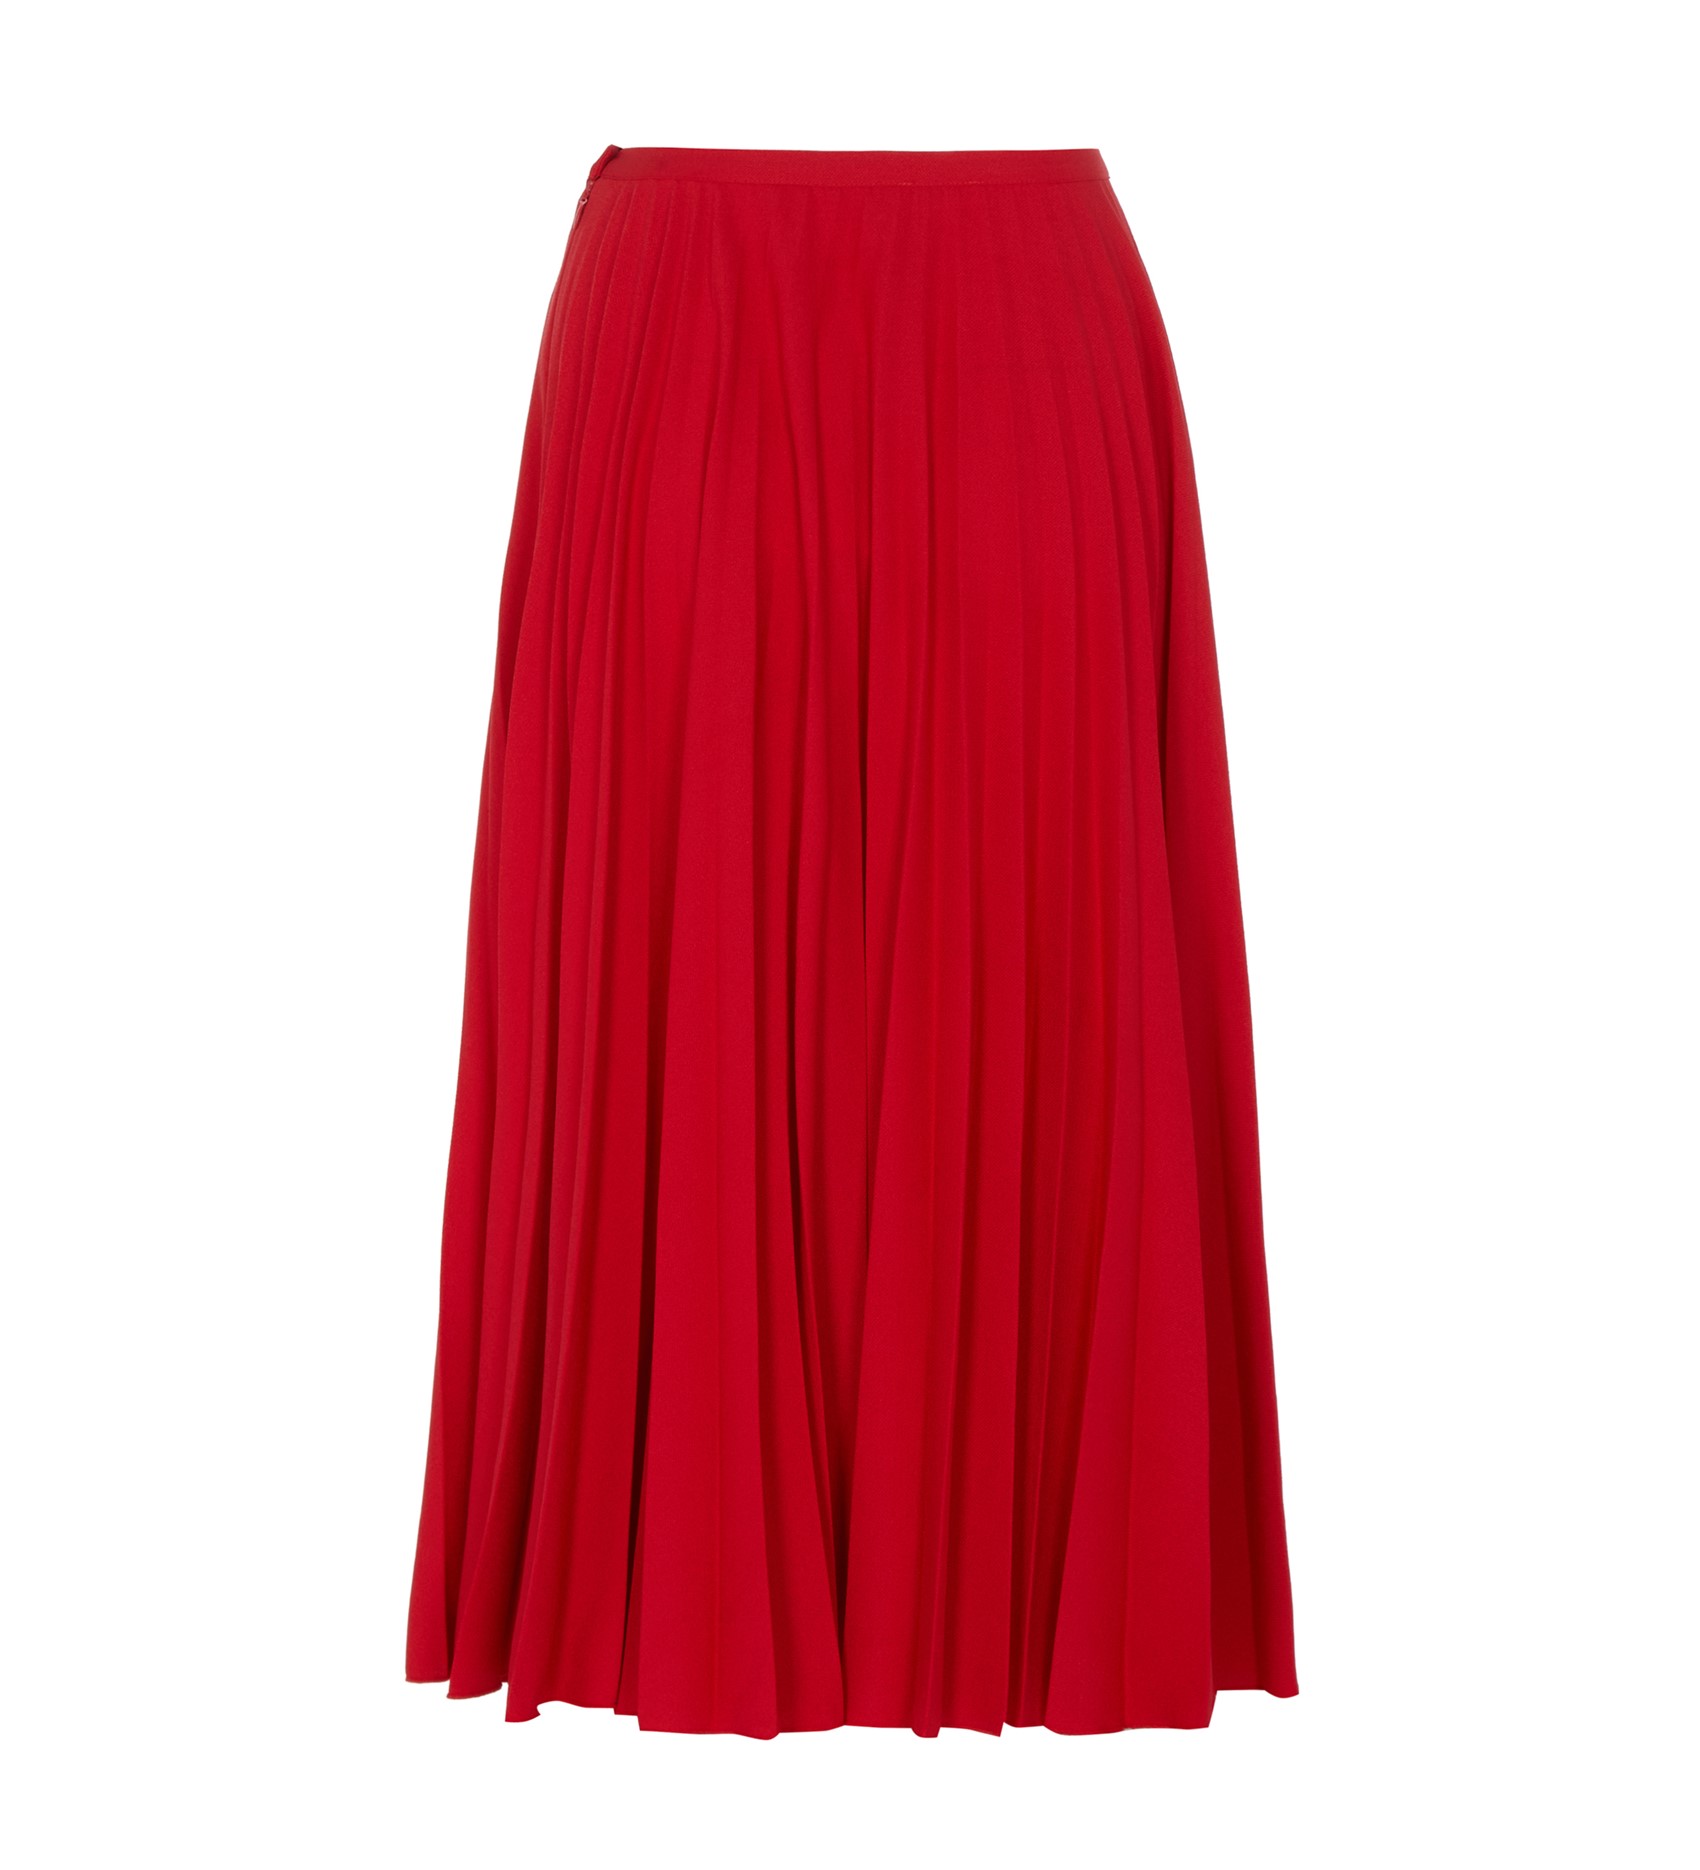 Skirt in Red | Finery London